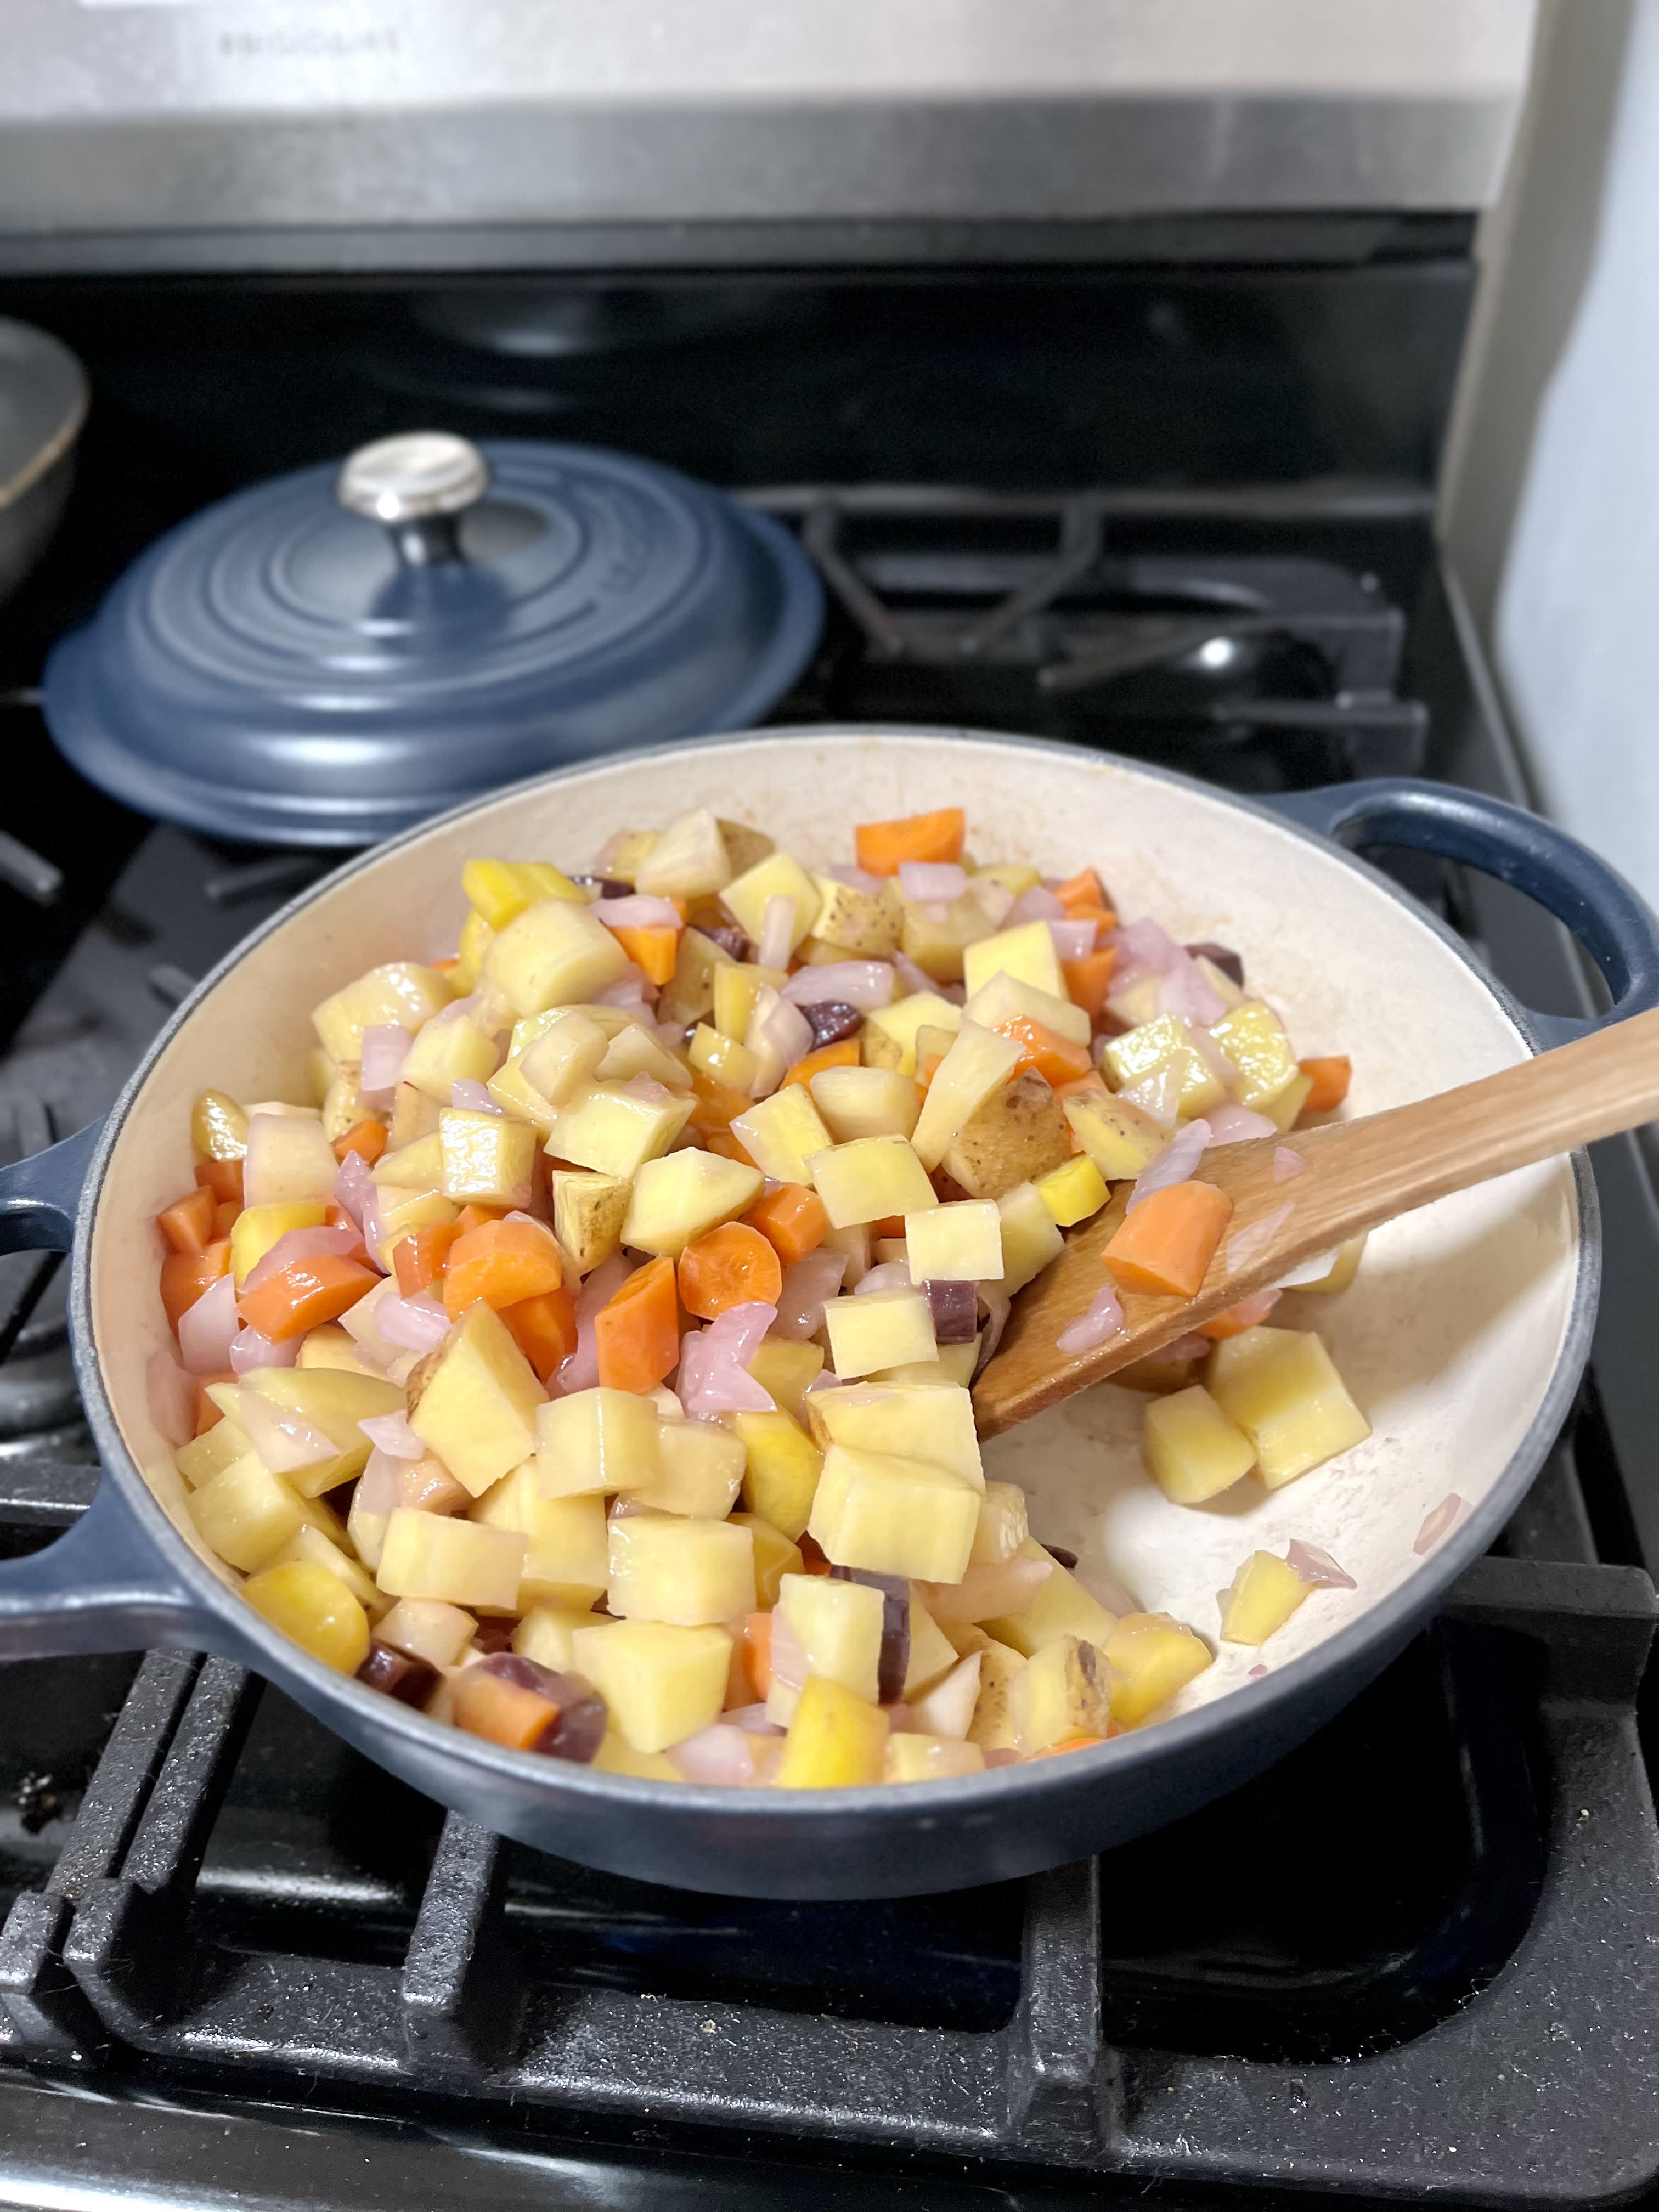 Le Creuset 2 Quart Round Dutch Oven — Review and Information